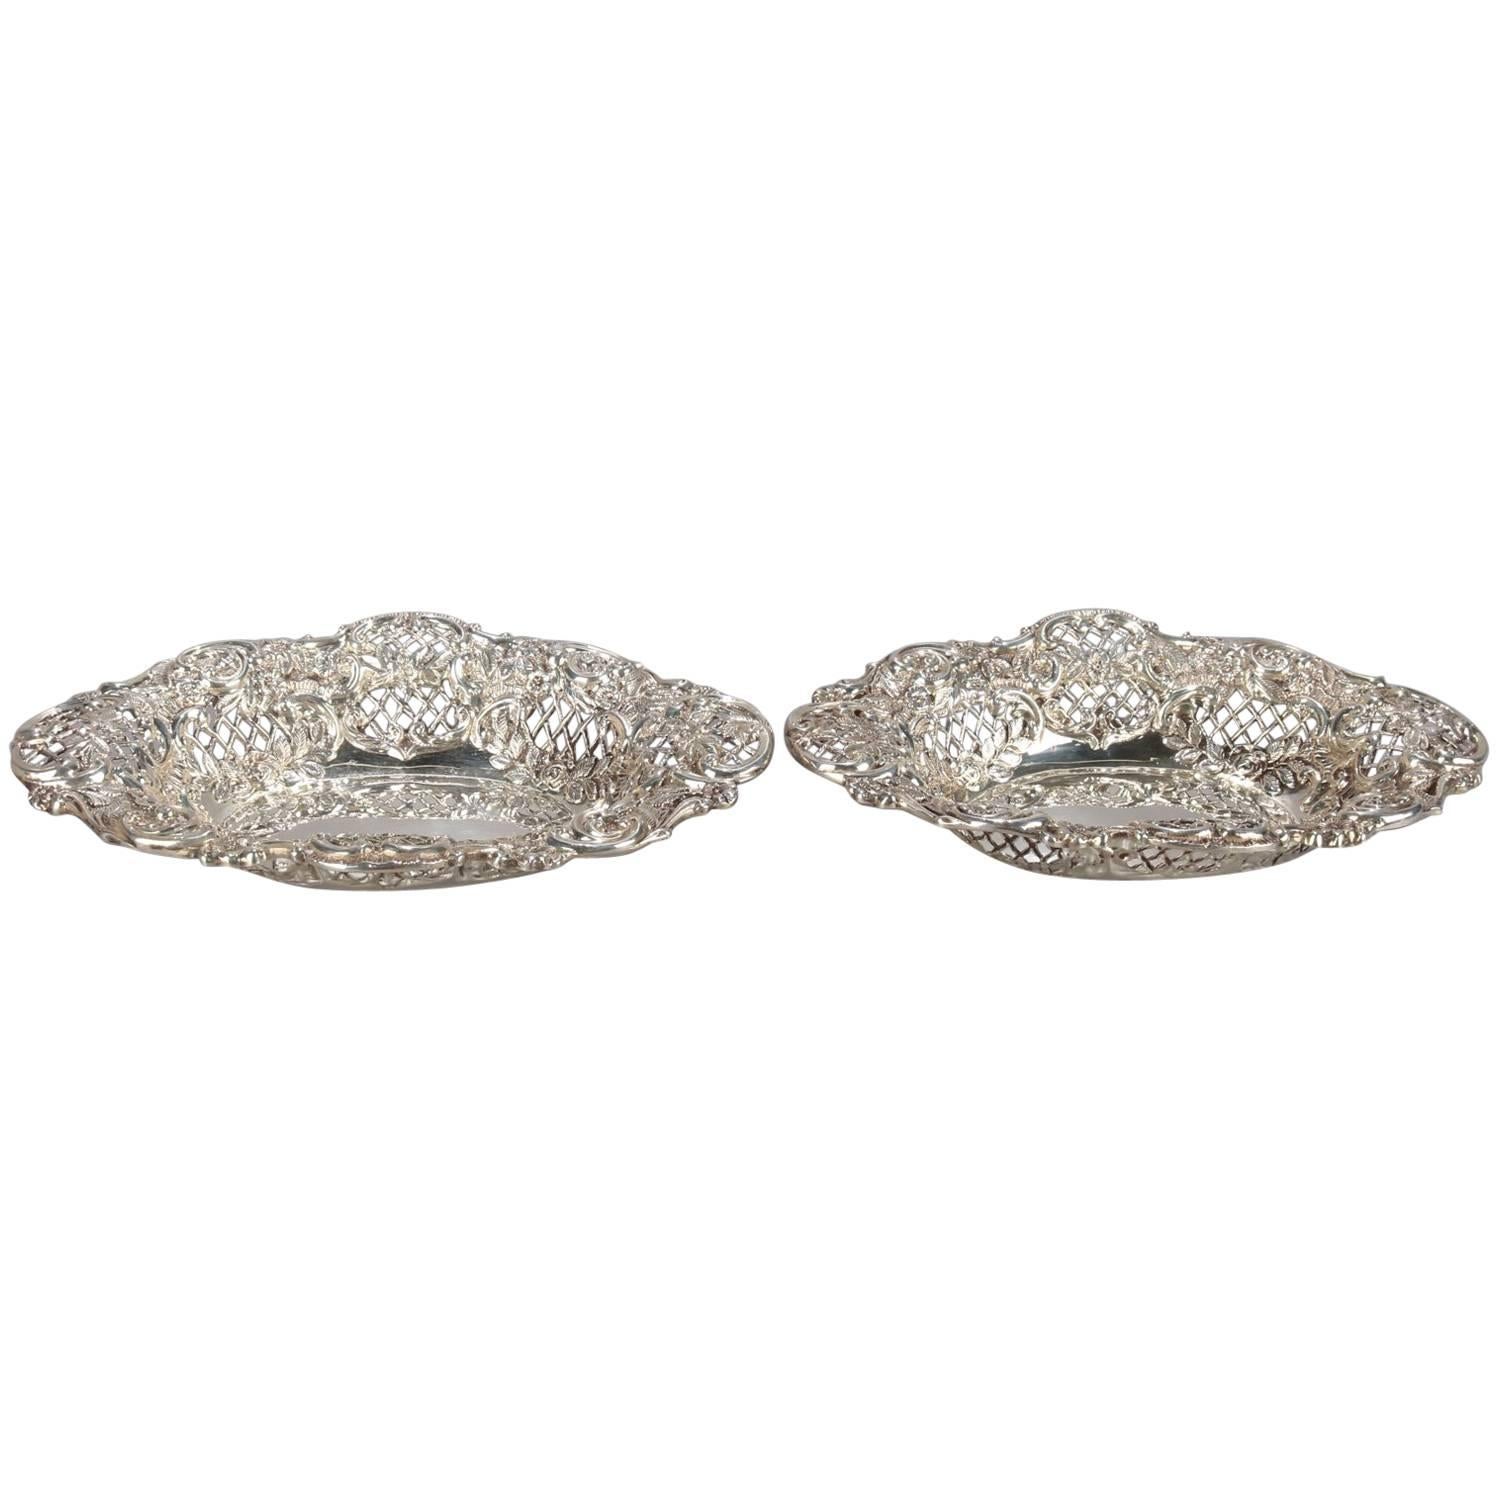 Pair of Antique Repoussé Sterling Silver Reticulated Basket by Henry Matthews